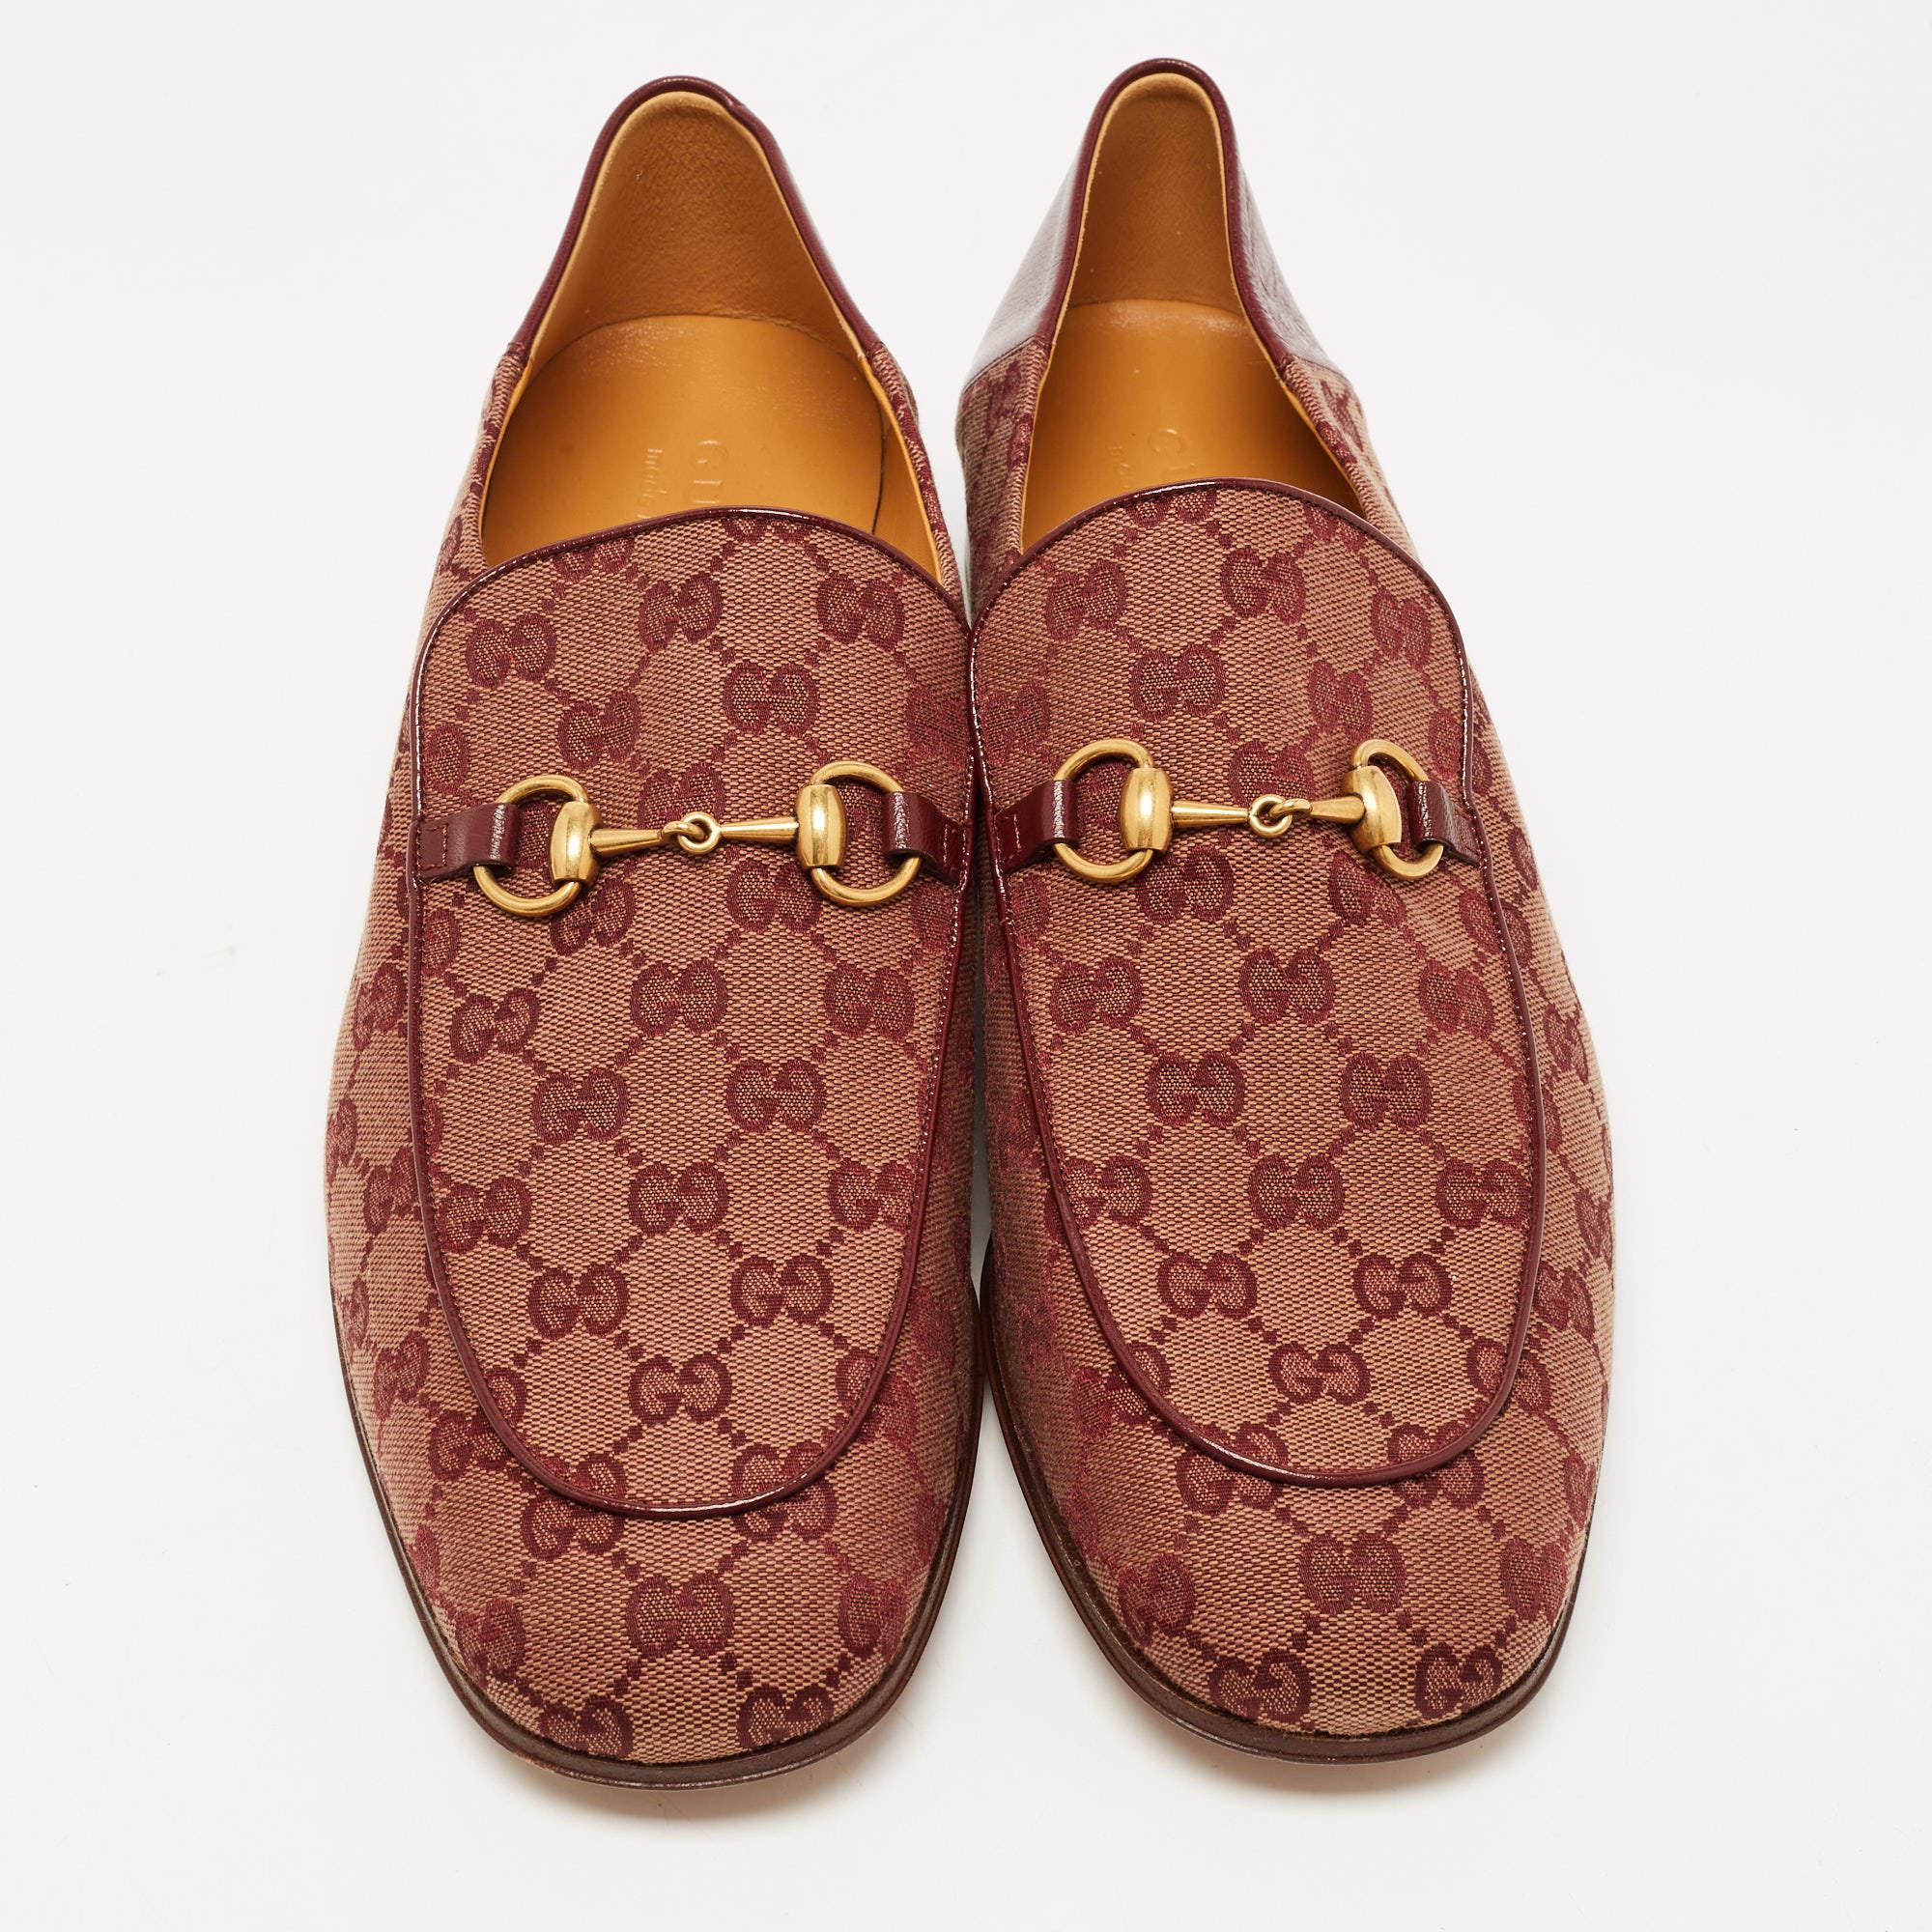 The Jordaan is a shoe that has a modern finish and a signature appeal. It has an elongated toe and the Gucci Horsebit motif gracing the uppers. This pair is crafted from GG canvas and sewn with utmost care to envelop your feet with